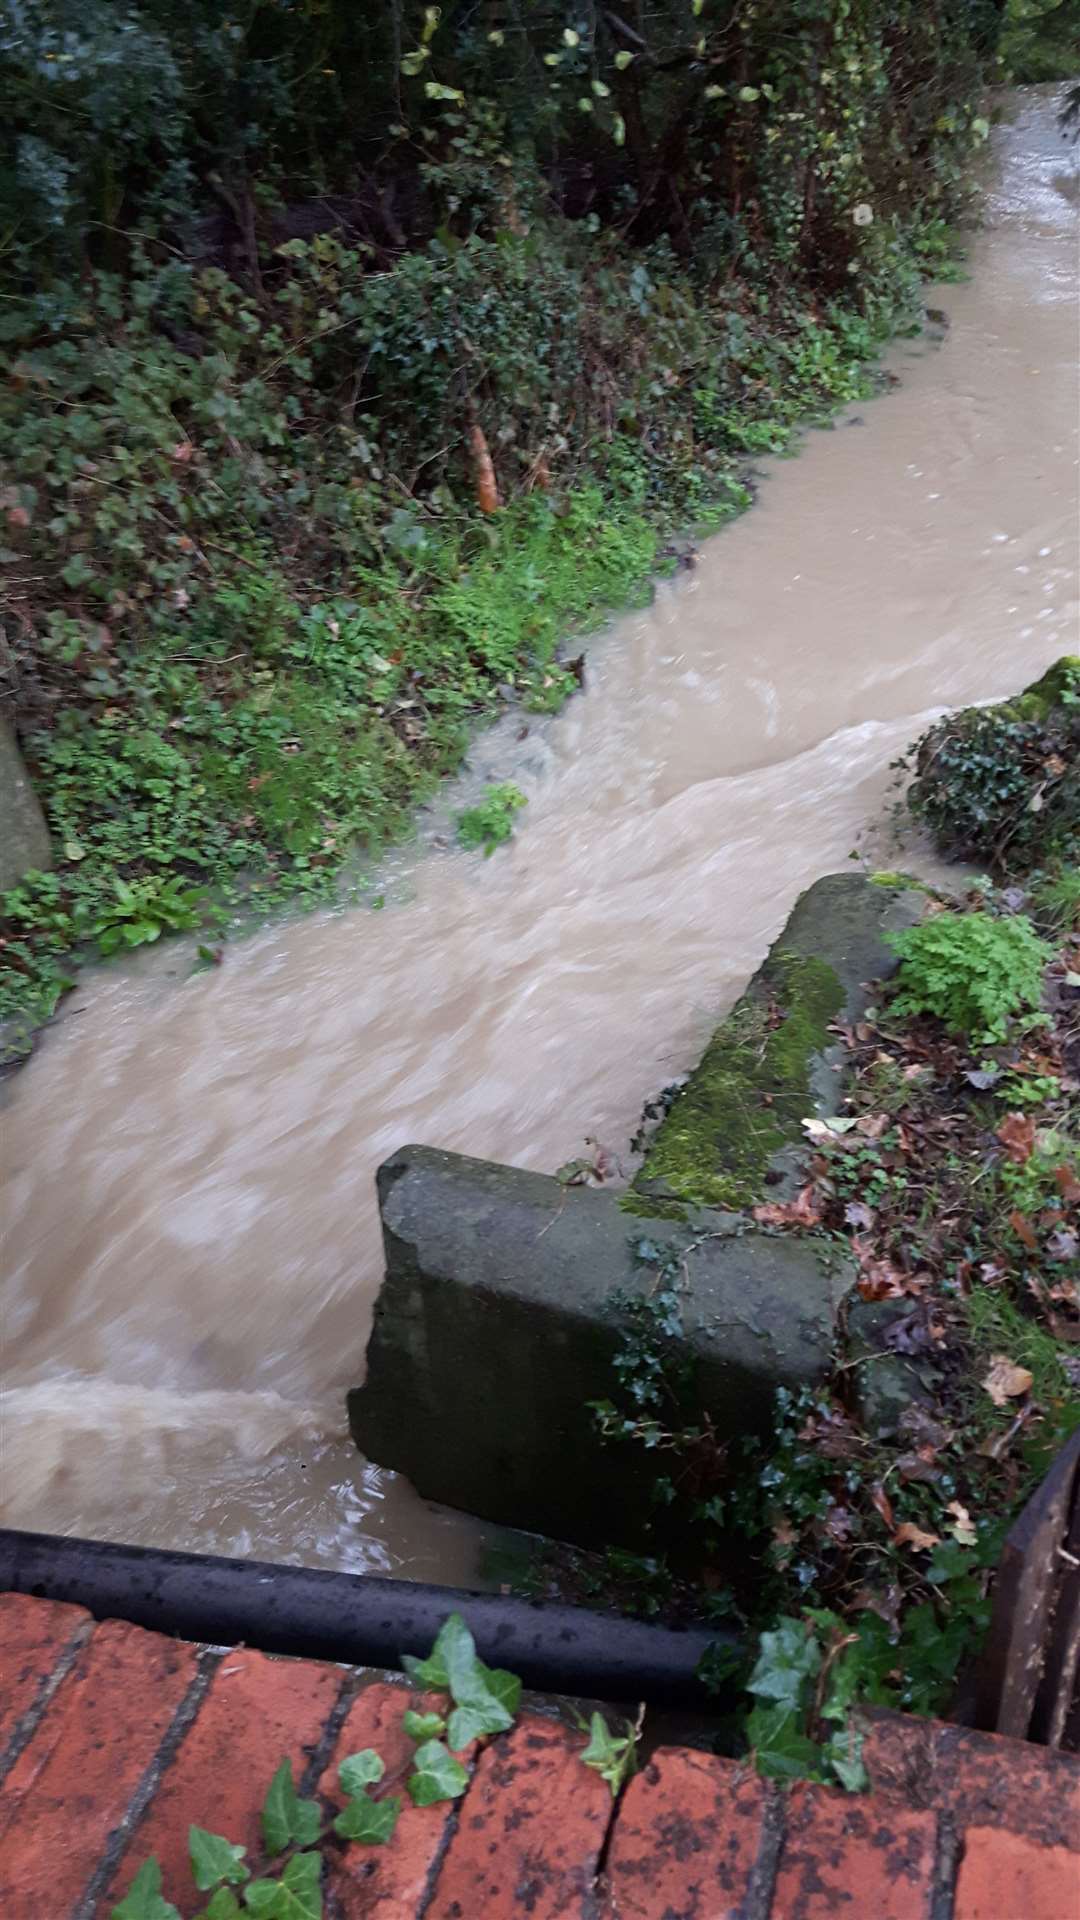 The Lilk Stream to the east of Sutton Street in Bearsted flows into the site